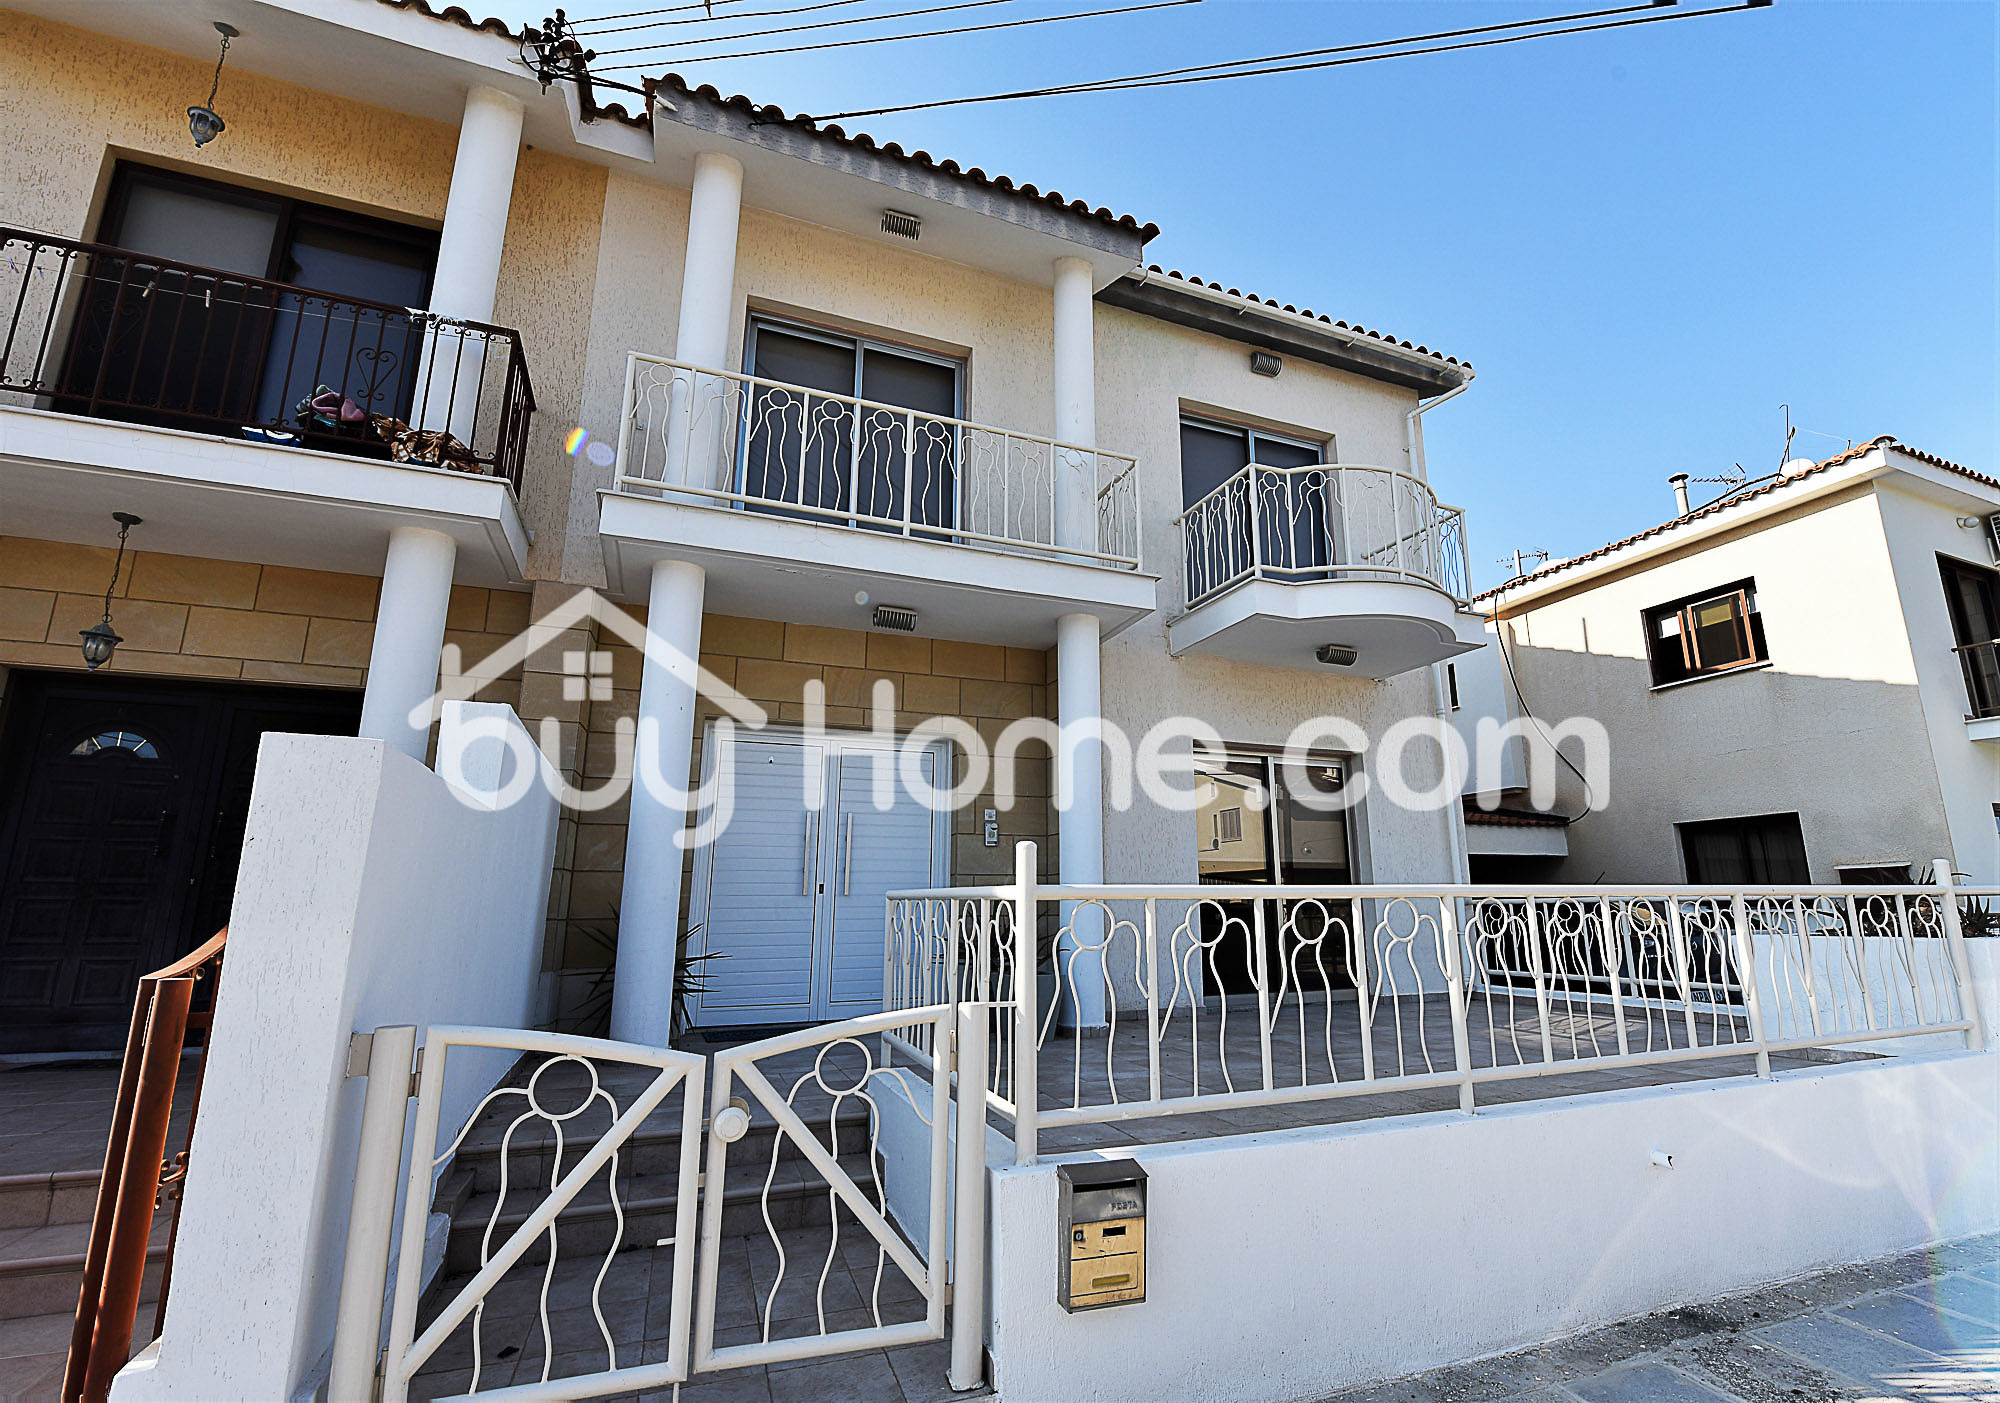 Beautiful 4 Bedroom House | BuyHome